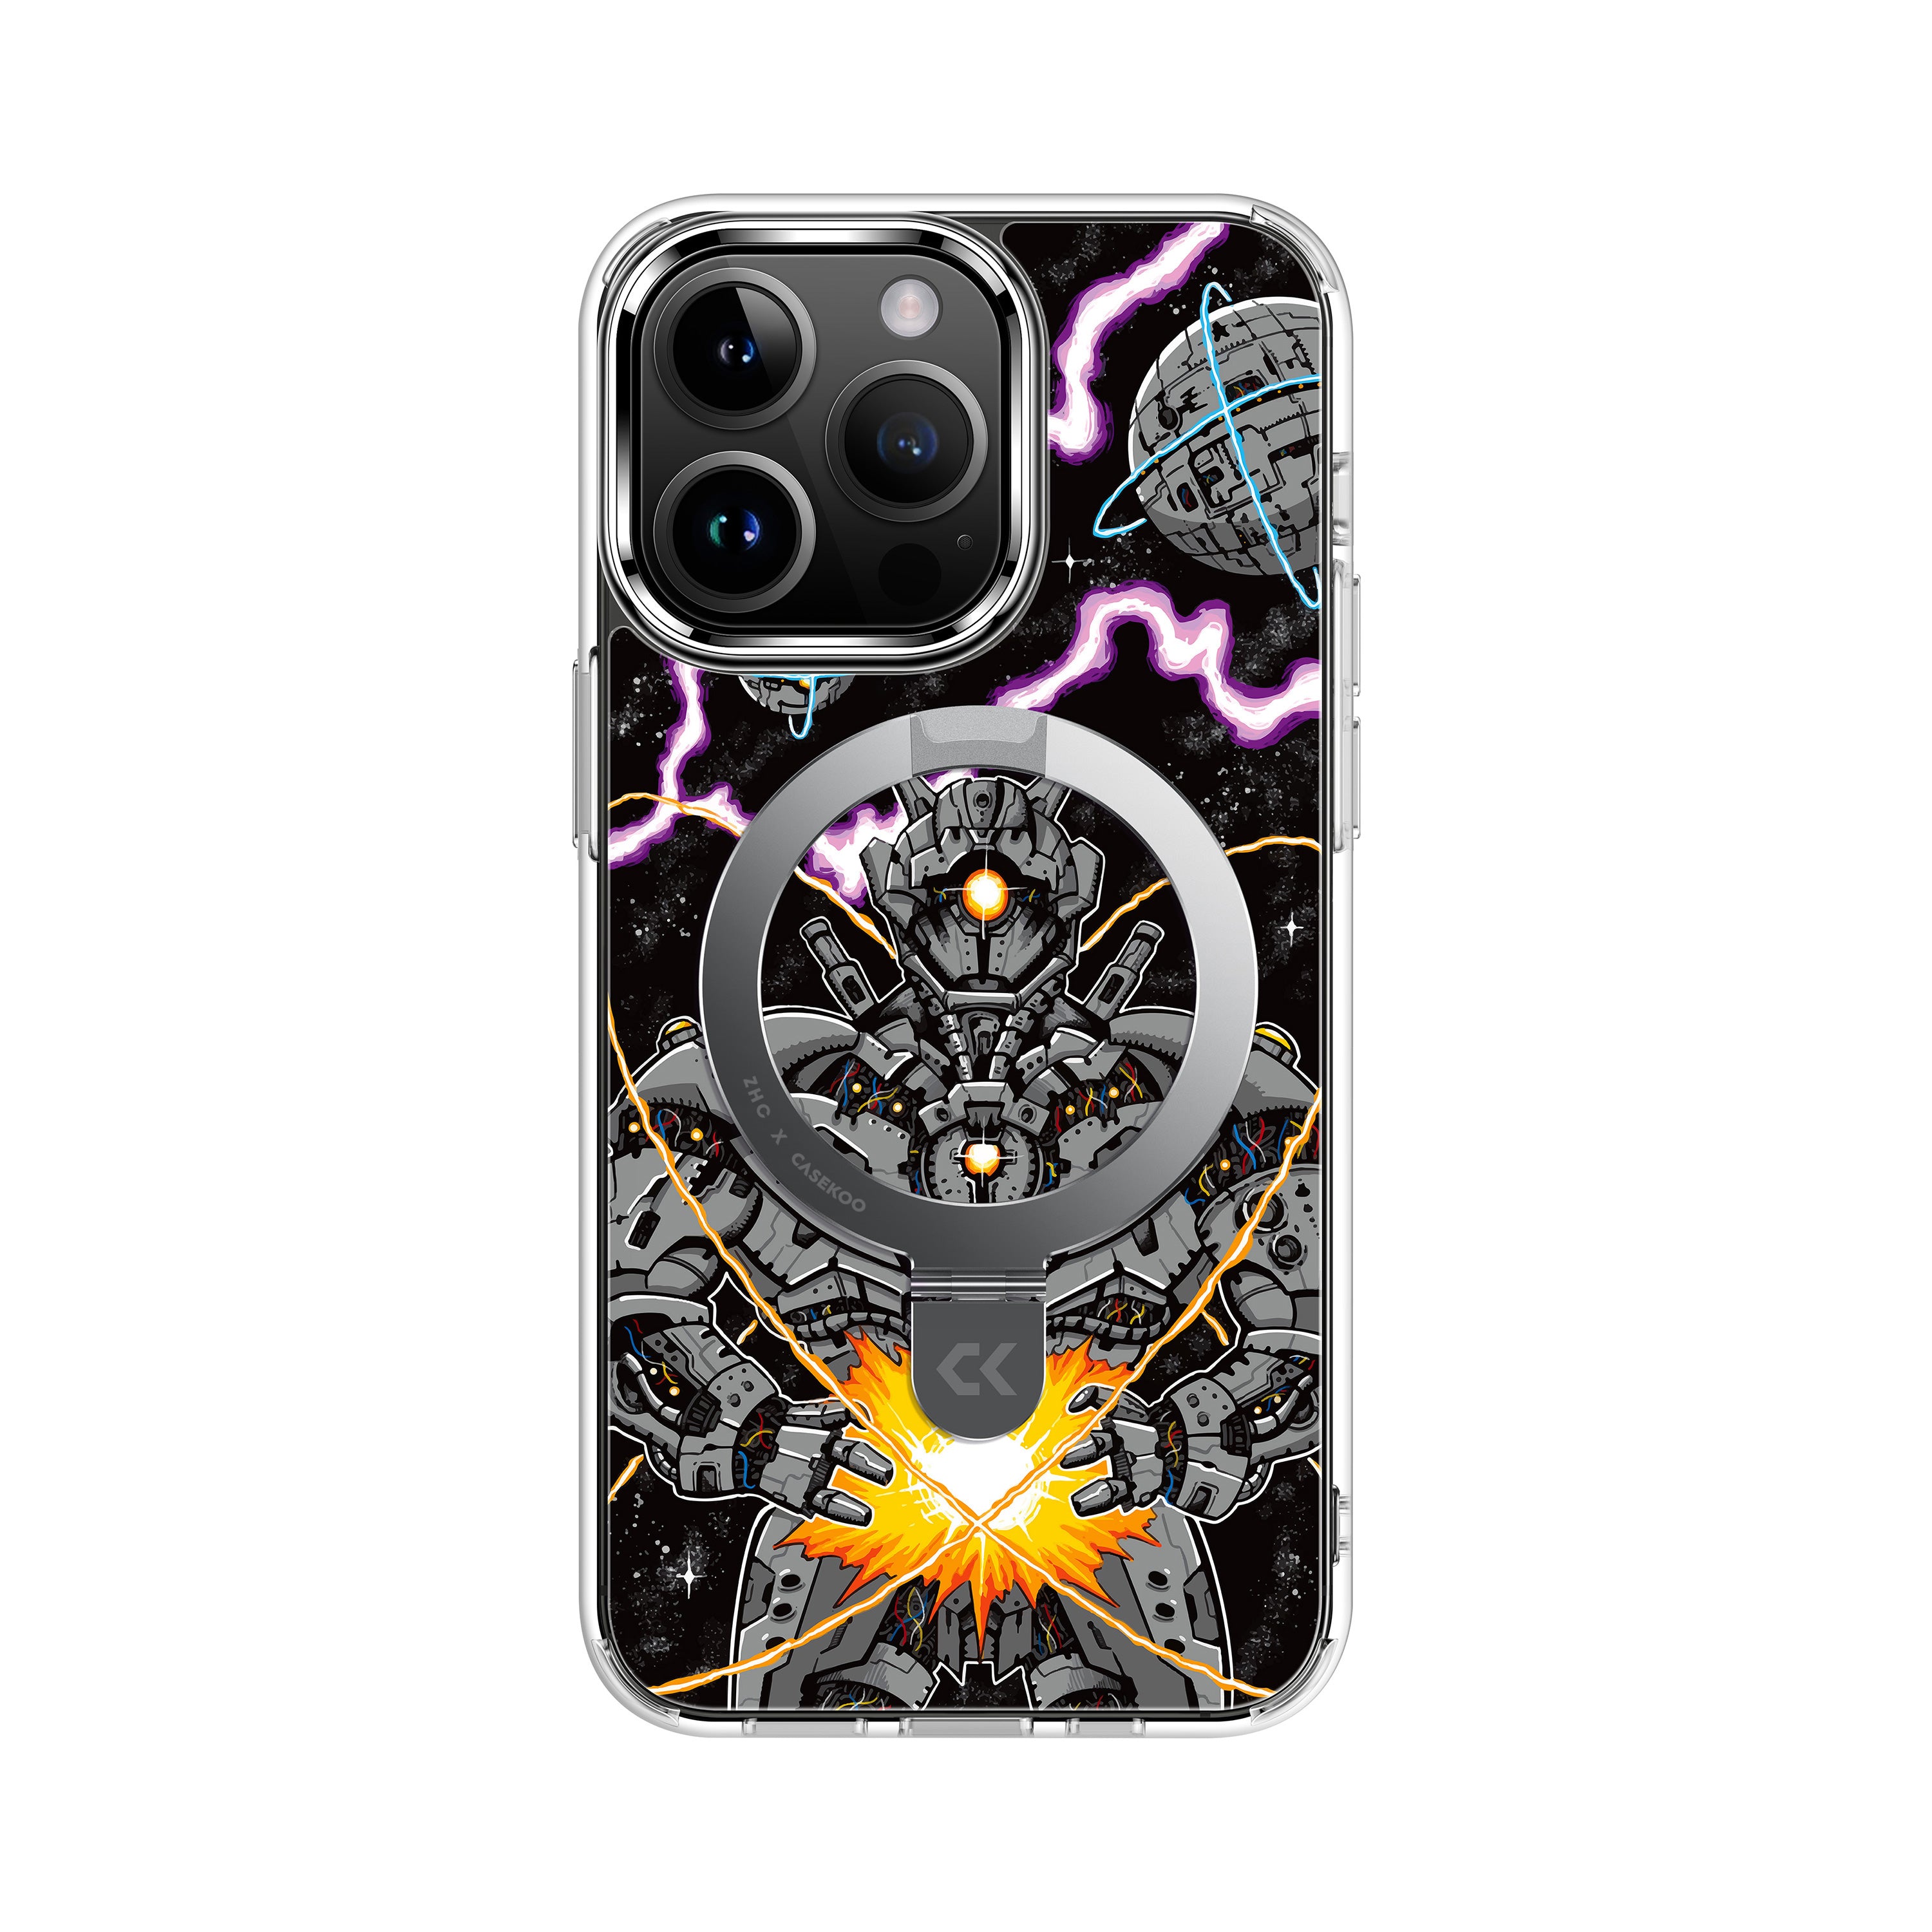 CASEKOO iPhone Space Titan Graffiti Phone Case with Built-in Magnetic Kickstand and MagSafe Compatible - ZHC x CASEKOO Series Magic Stand Version